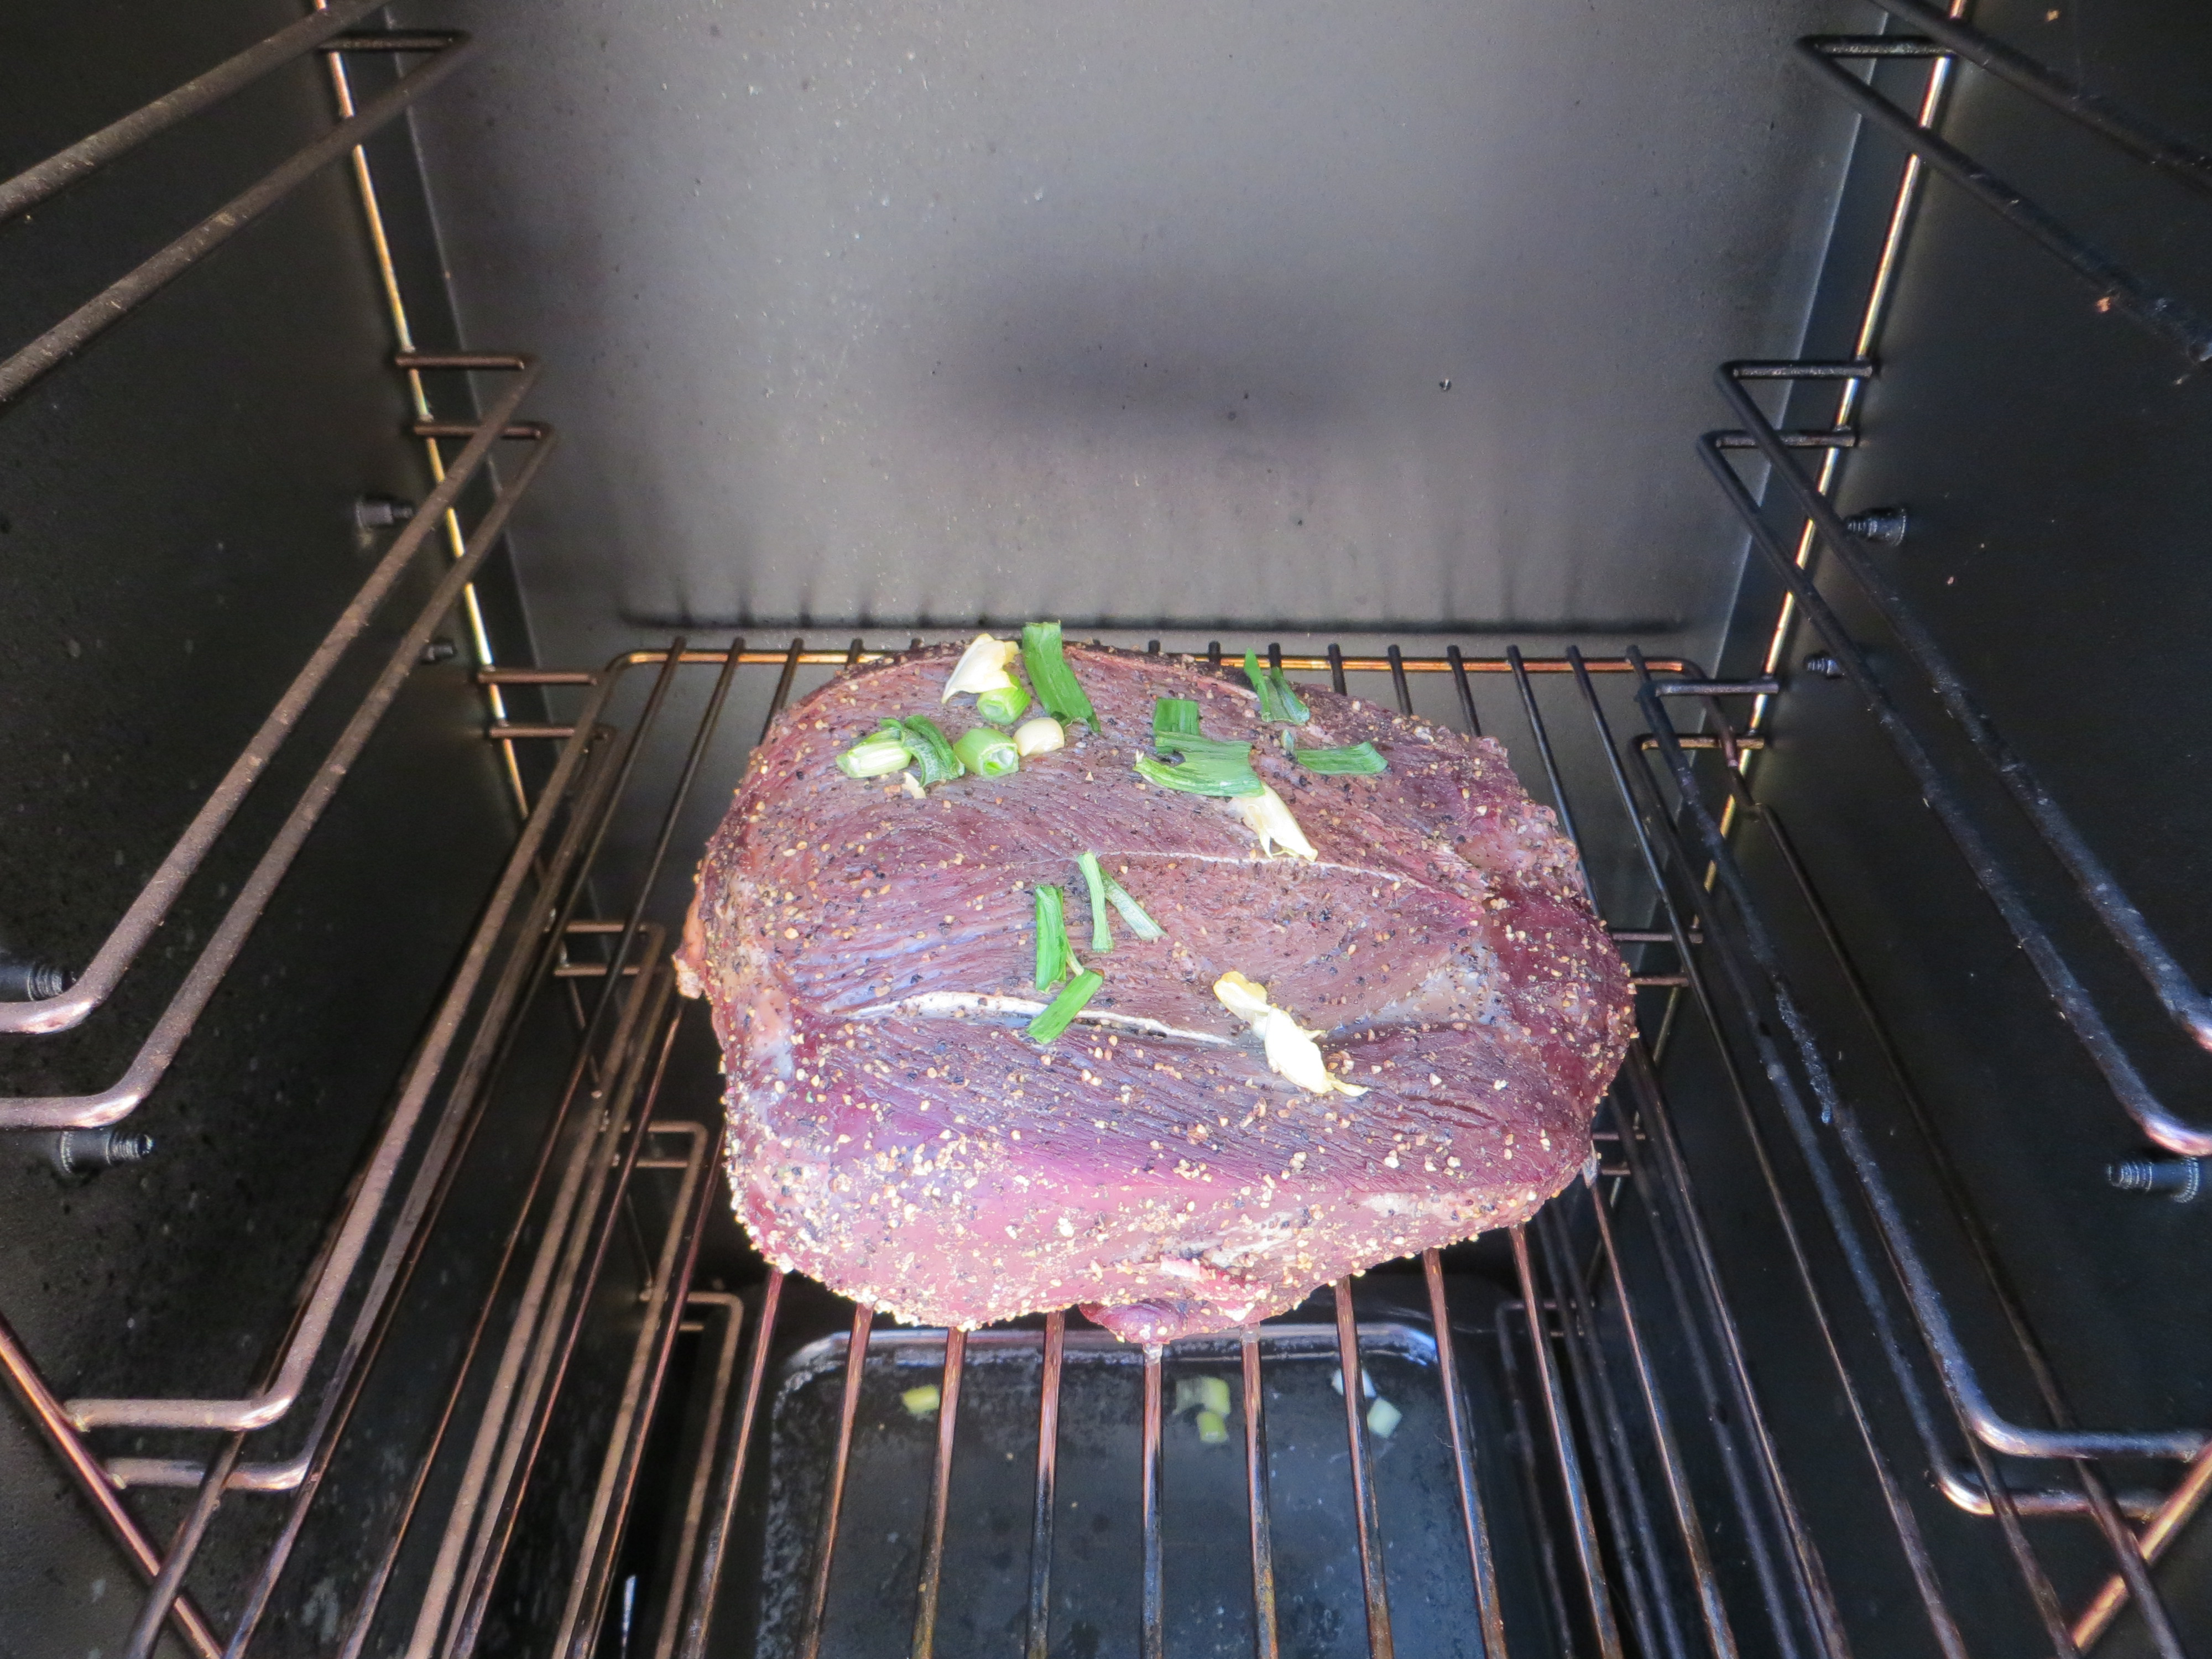 Roast beef at the 3 hour mark.